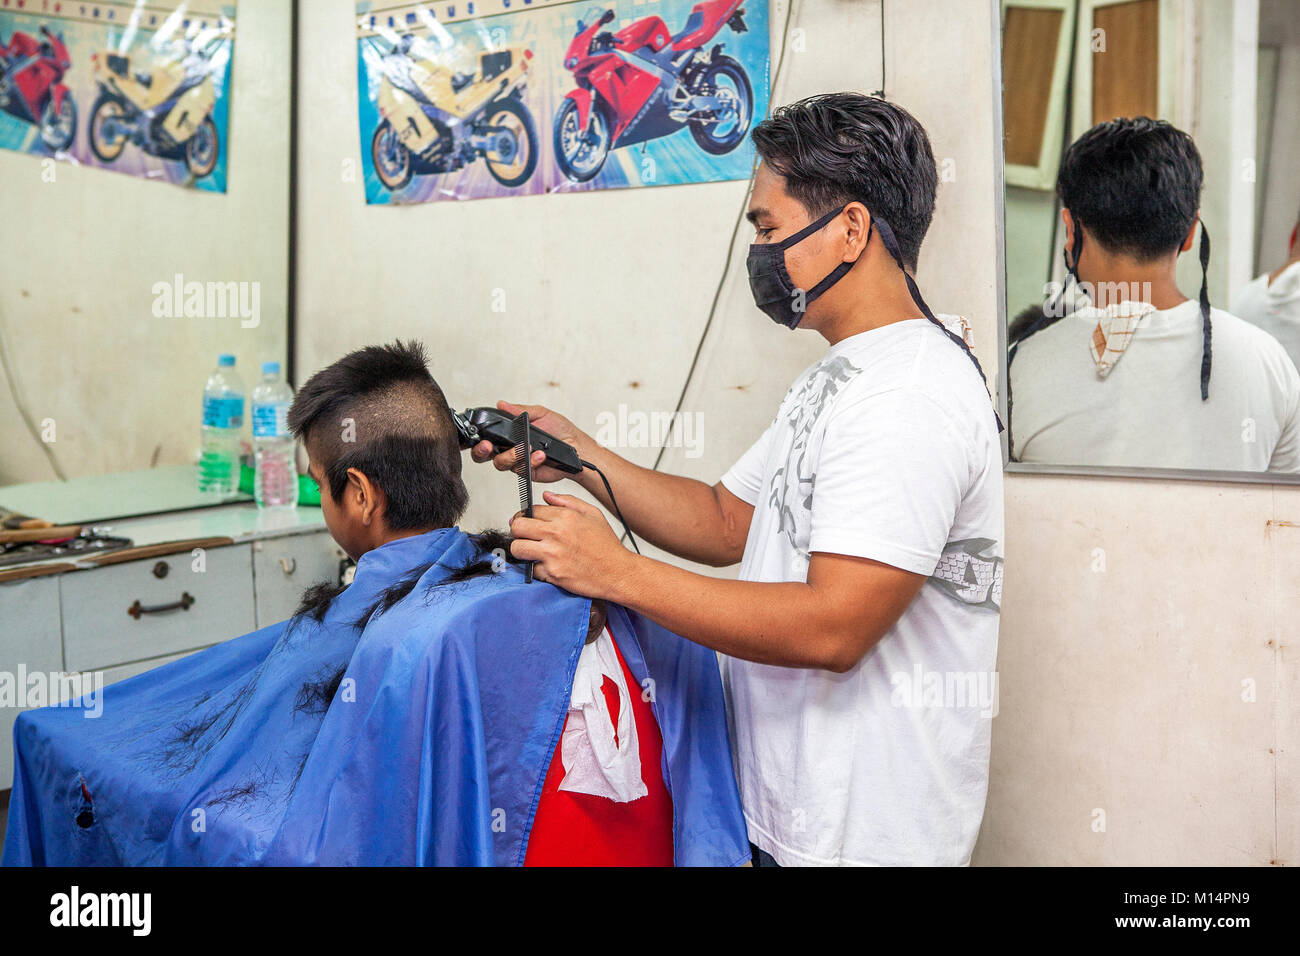 A Filipino barber cuts a high and tight fade hairstyle on a teenage boy in Barretto, Luzon, Philippines. Stock Photo